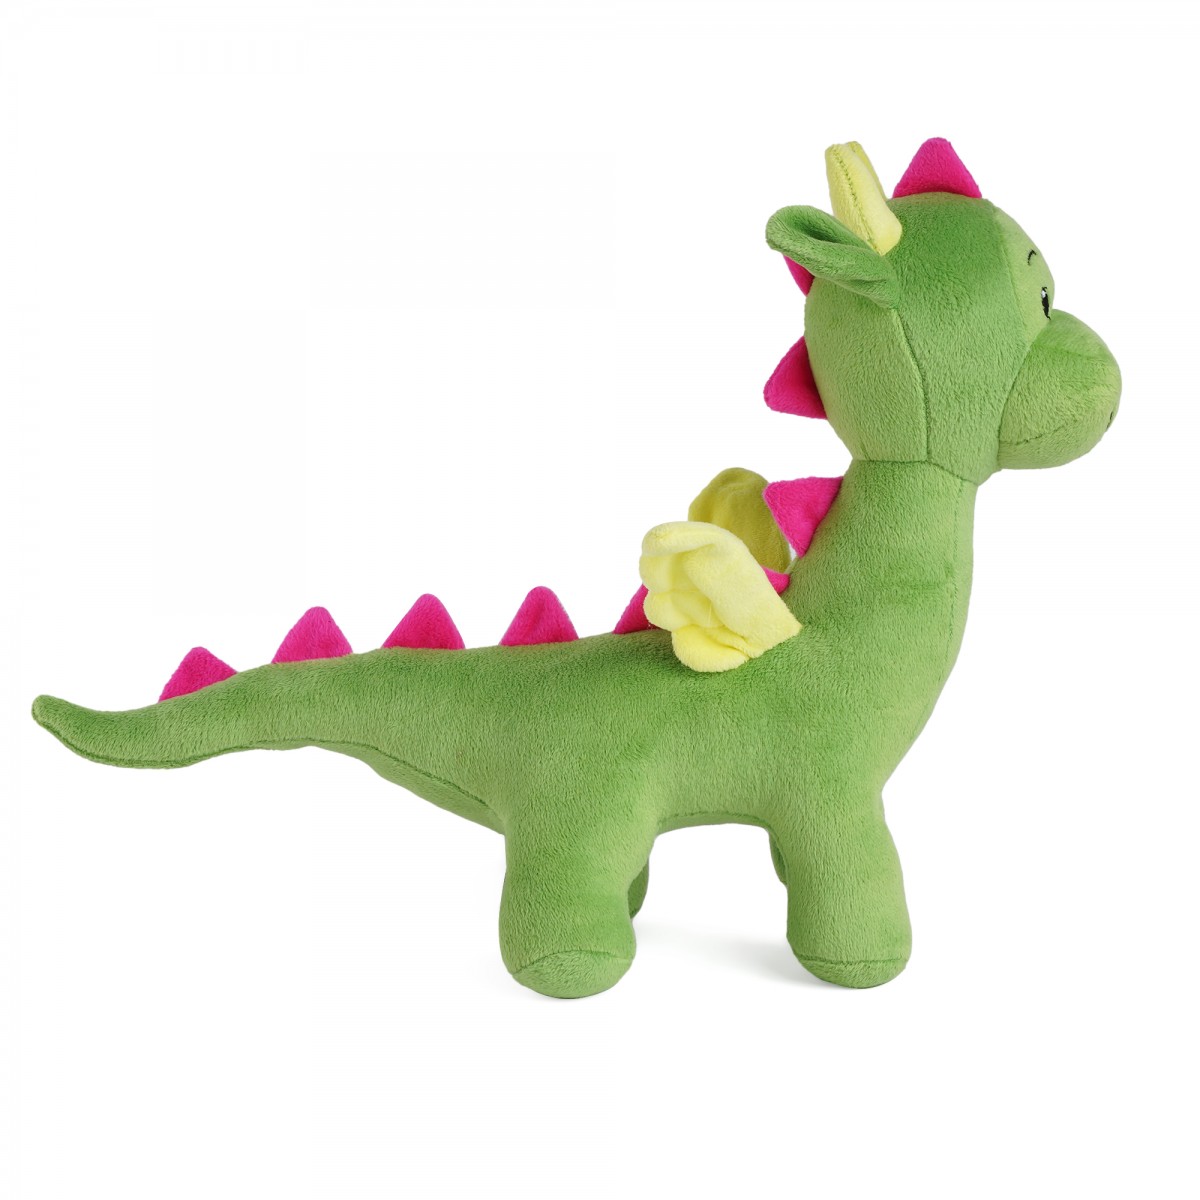 Huggable Cuddly Veto Dragon Stuffed Toy By Fuzzbuzz, Soft Toys for Kids, Cute Plushies Green, For Kids Of Age 2 Years & Above, 26cm